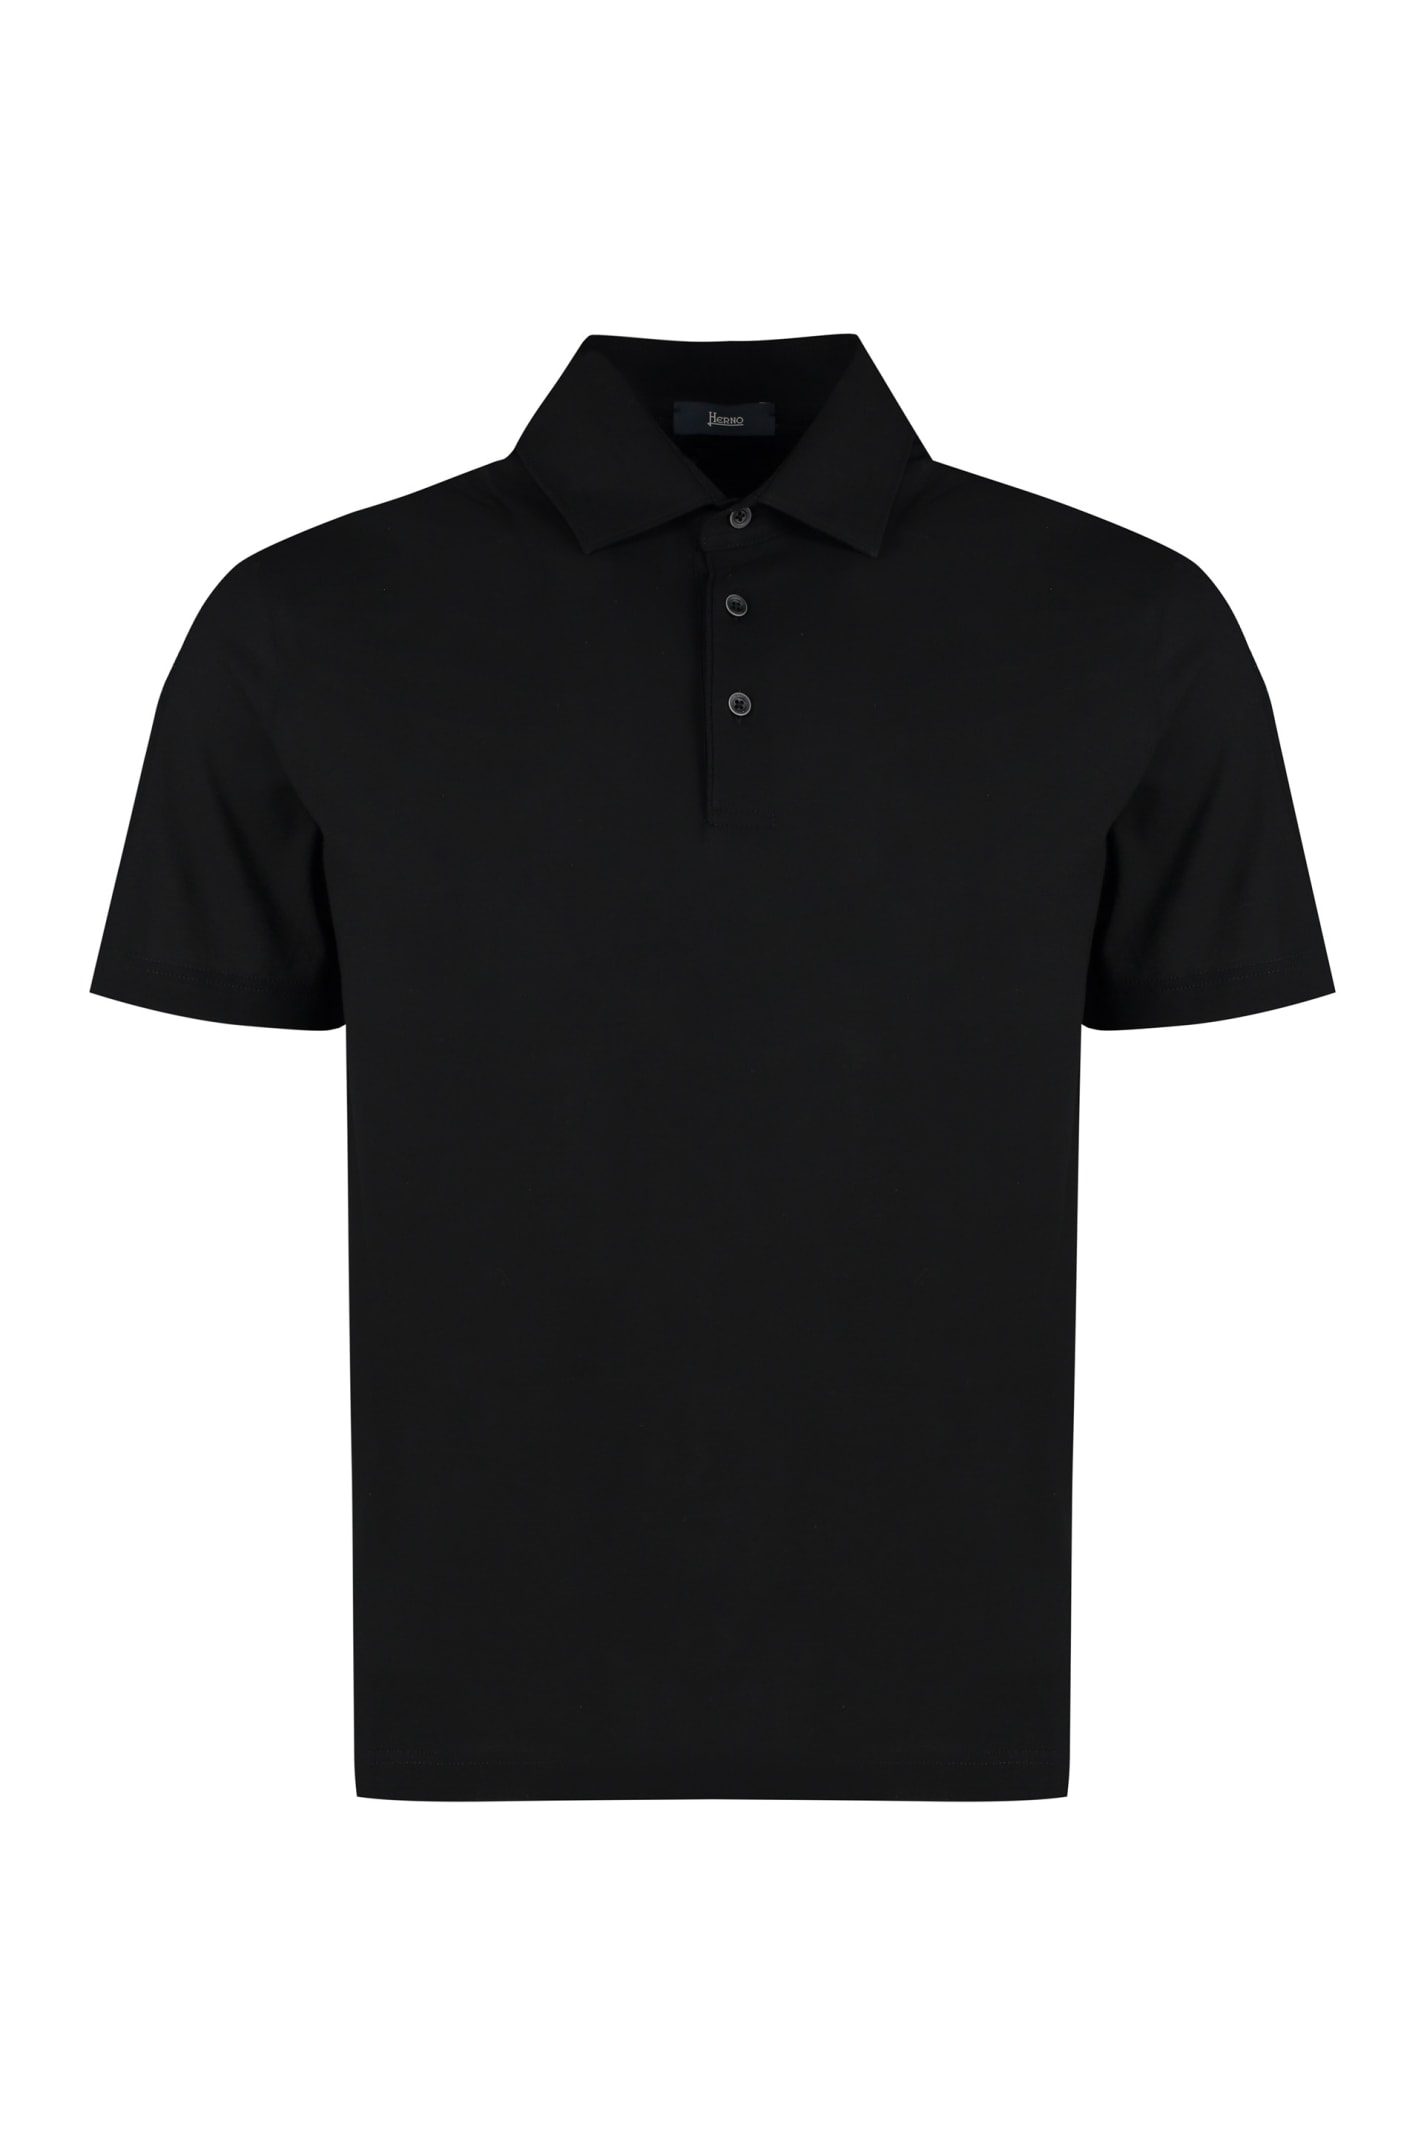 Herno Cotton Jersey Polo Shirt In Black